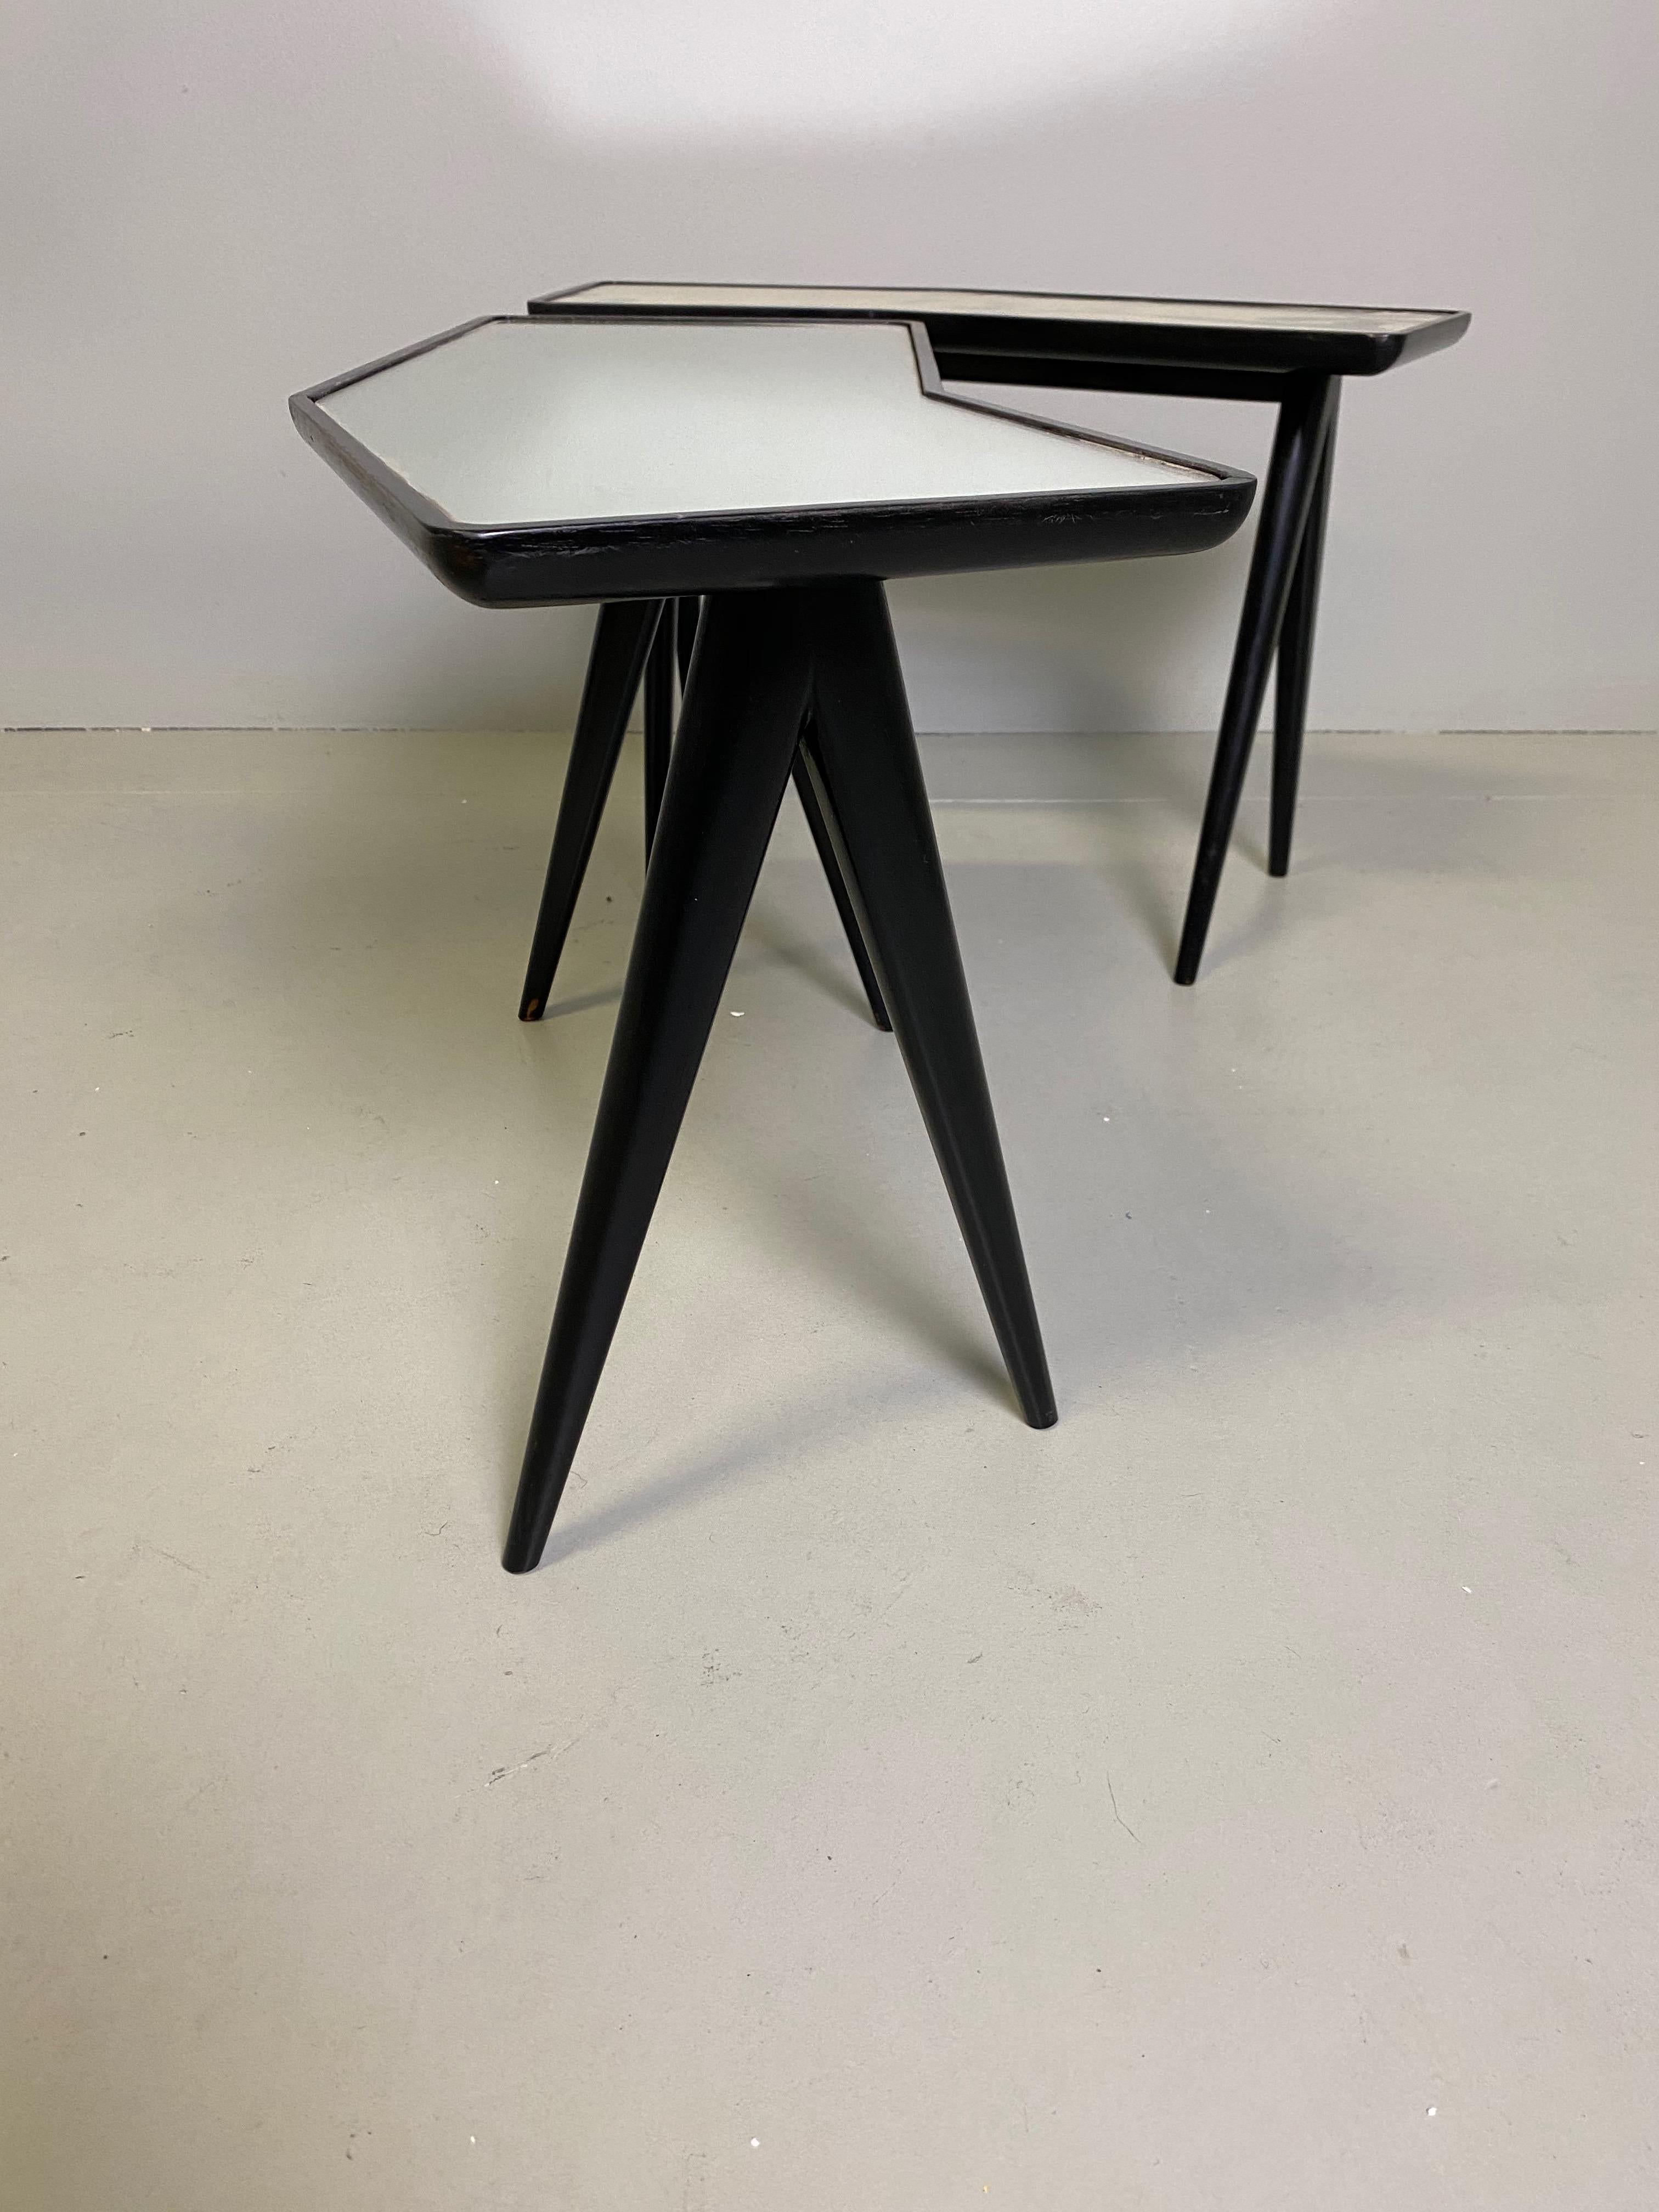 Pair of Italian master architect Gio Ponti black lacquered walnut side tables with mirrored glass tops by Pietro Chiesa. 
 From the circa 1960s.